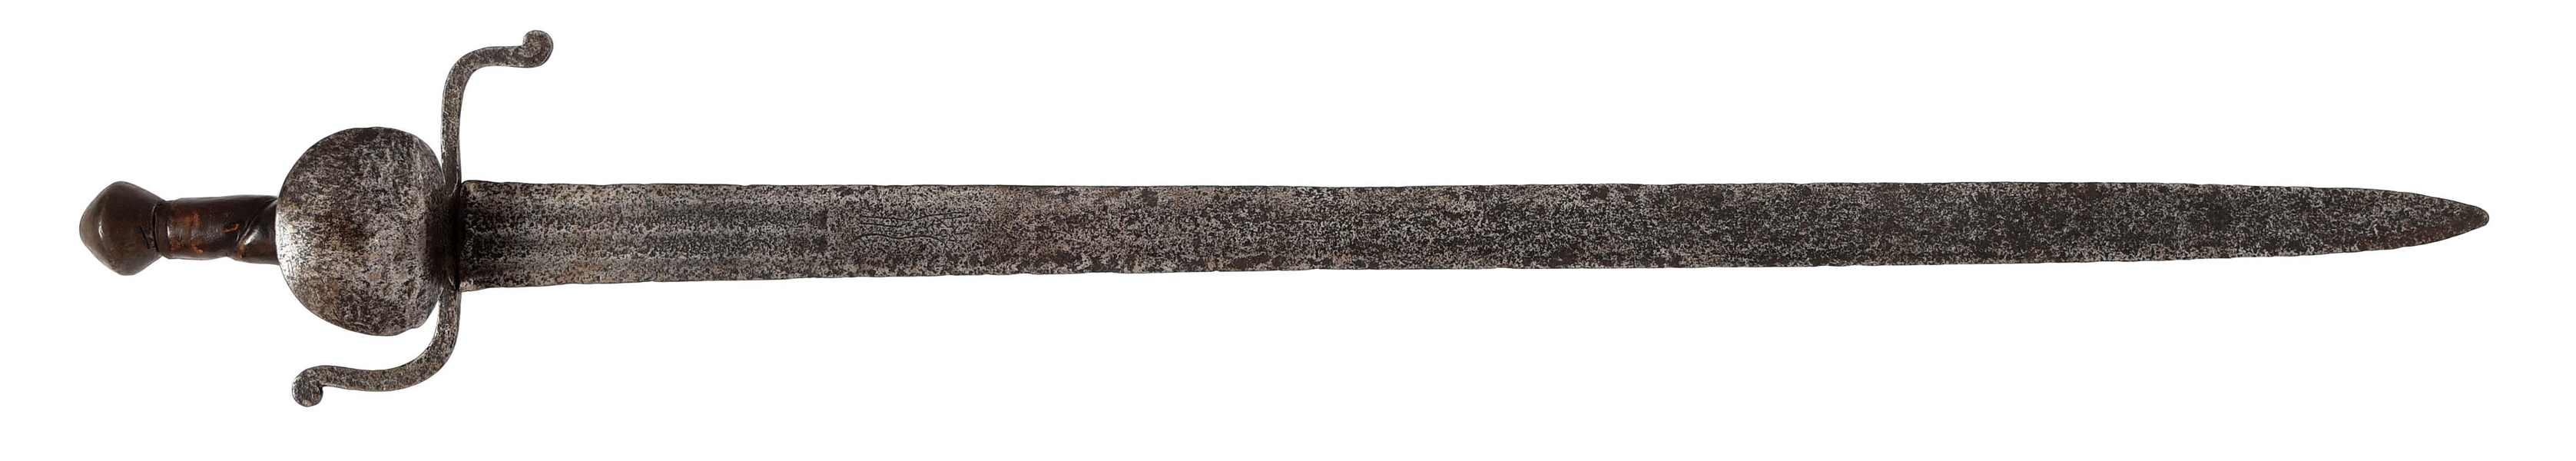 EARLY COMPOSITE HAND AND A HALF CLAMSHELL GUARD SWORD WITH BLADE MARKED "FERARA".